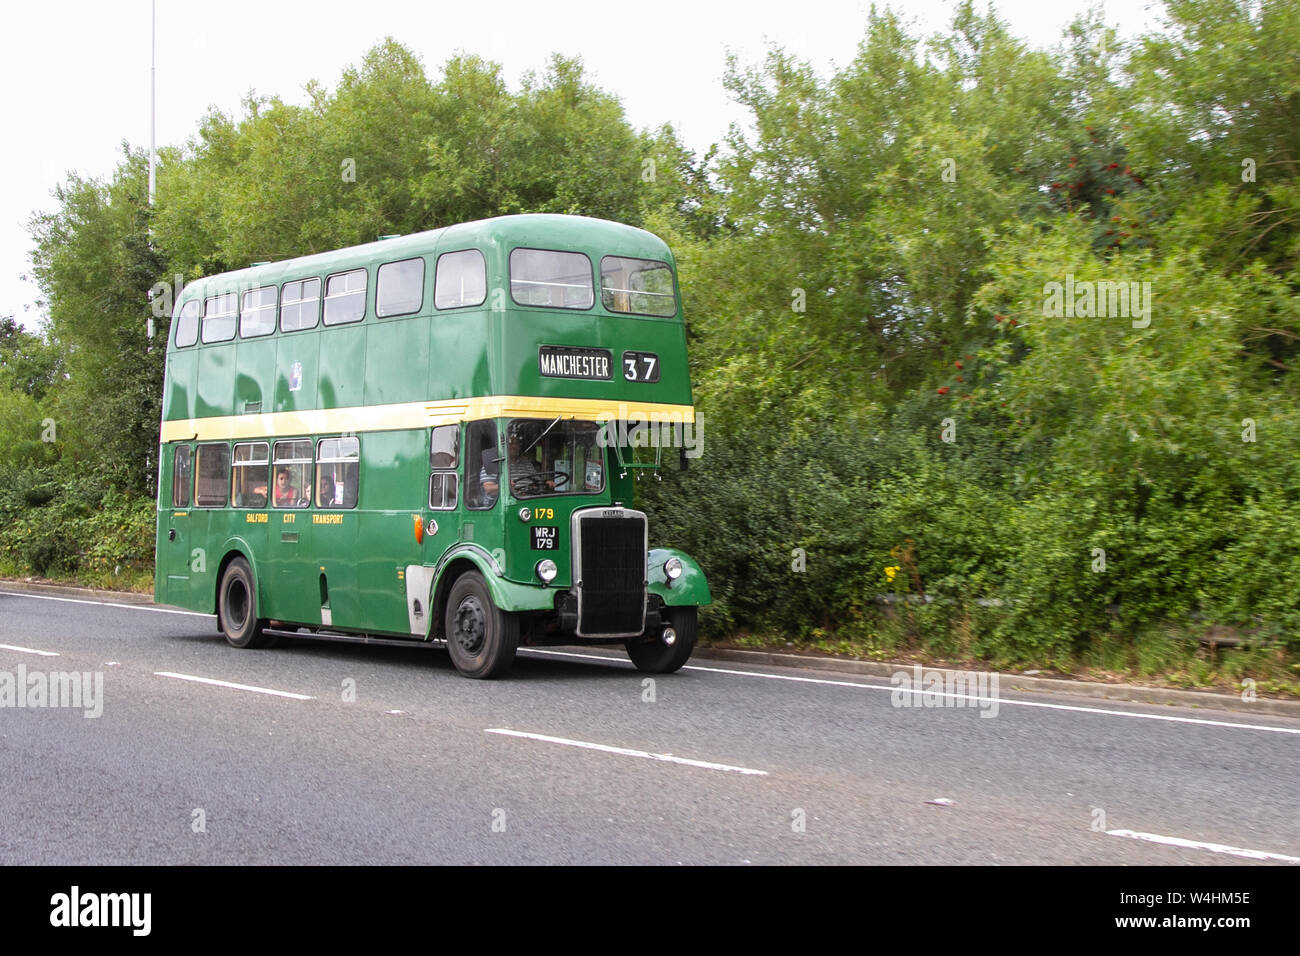 1963 60s Leyland green cream double-decker bus;  Sunday 2019; a festival of Transport held in the seaside town of Fleetwood, Lancashire, UK Stock Photo